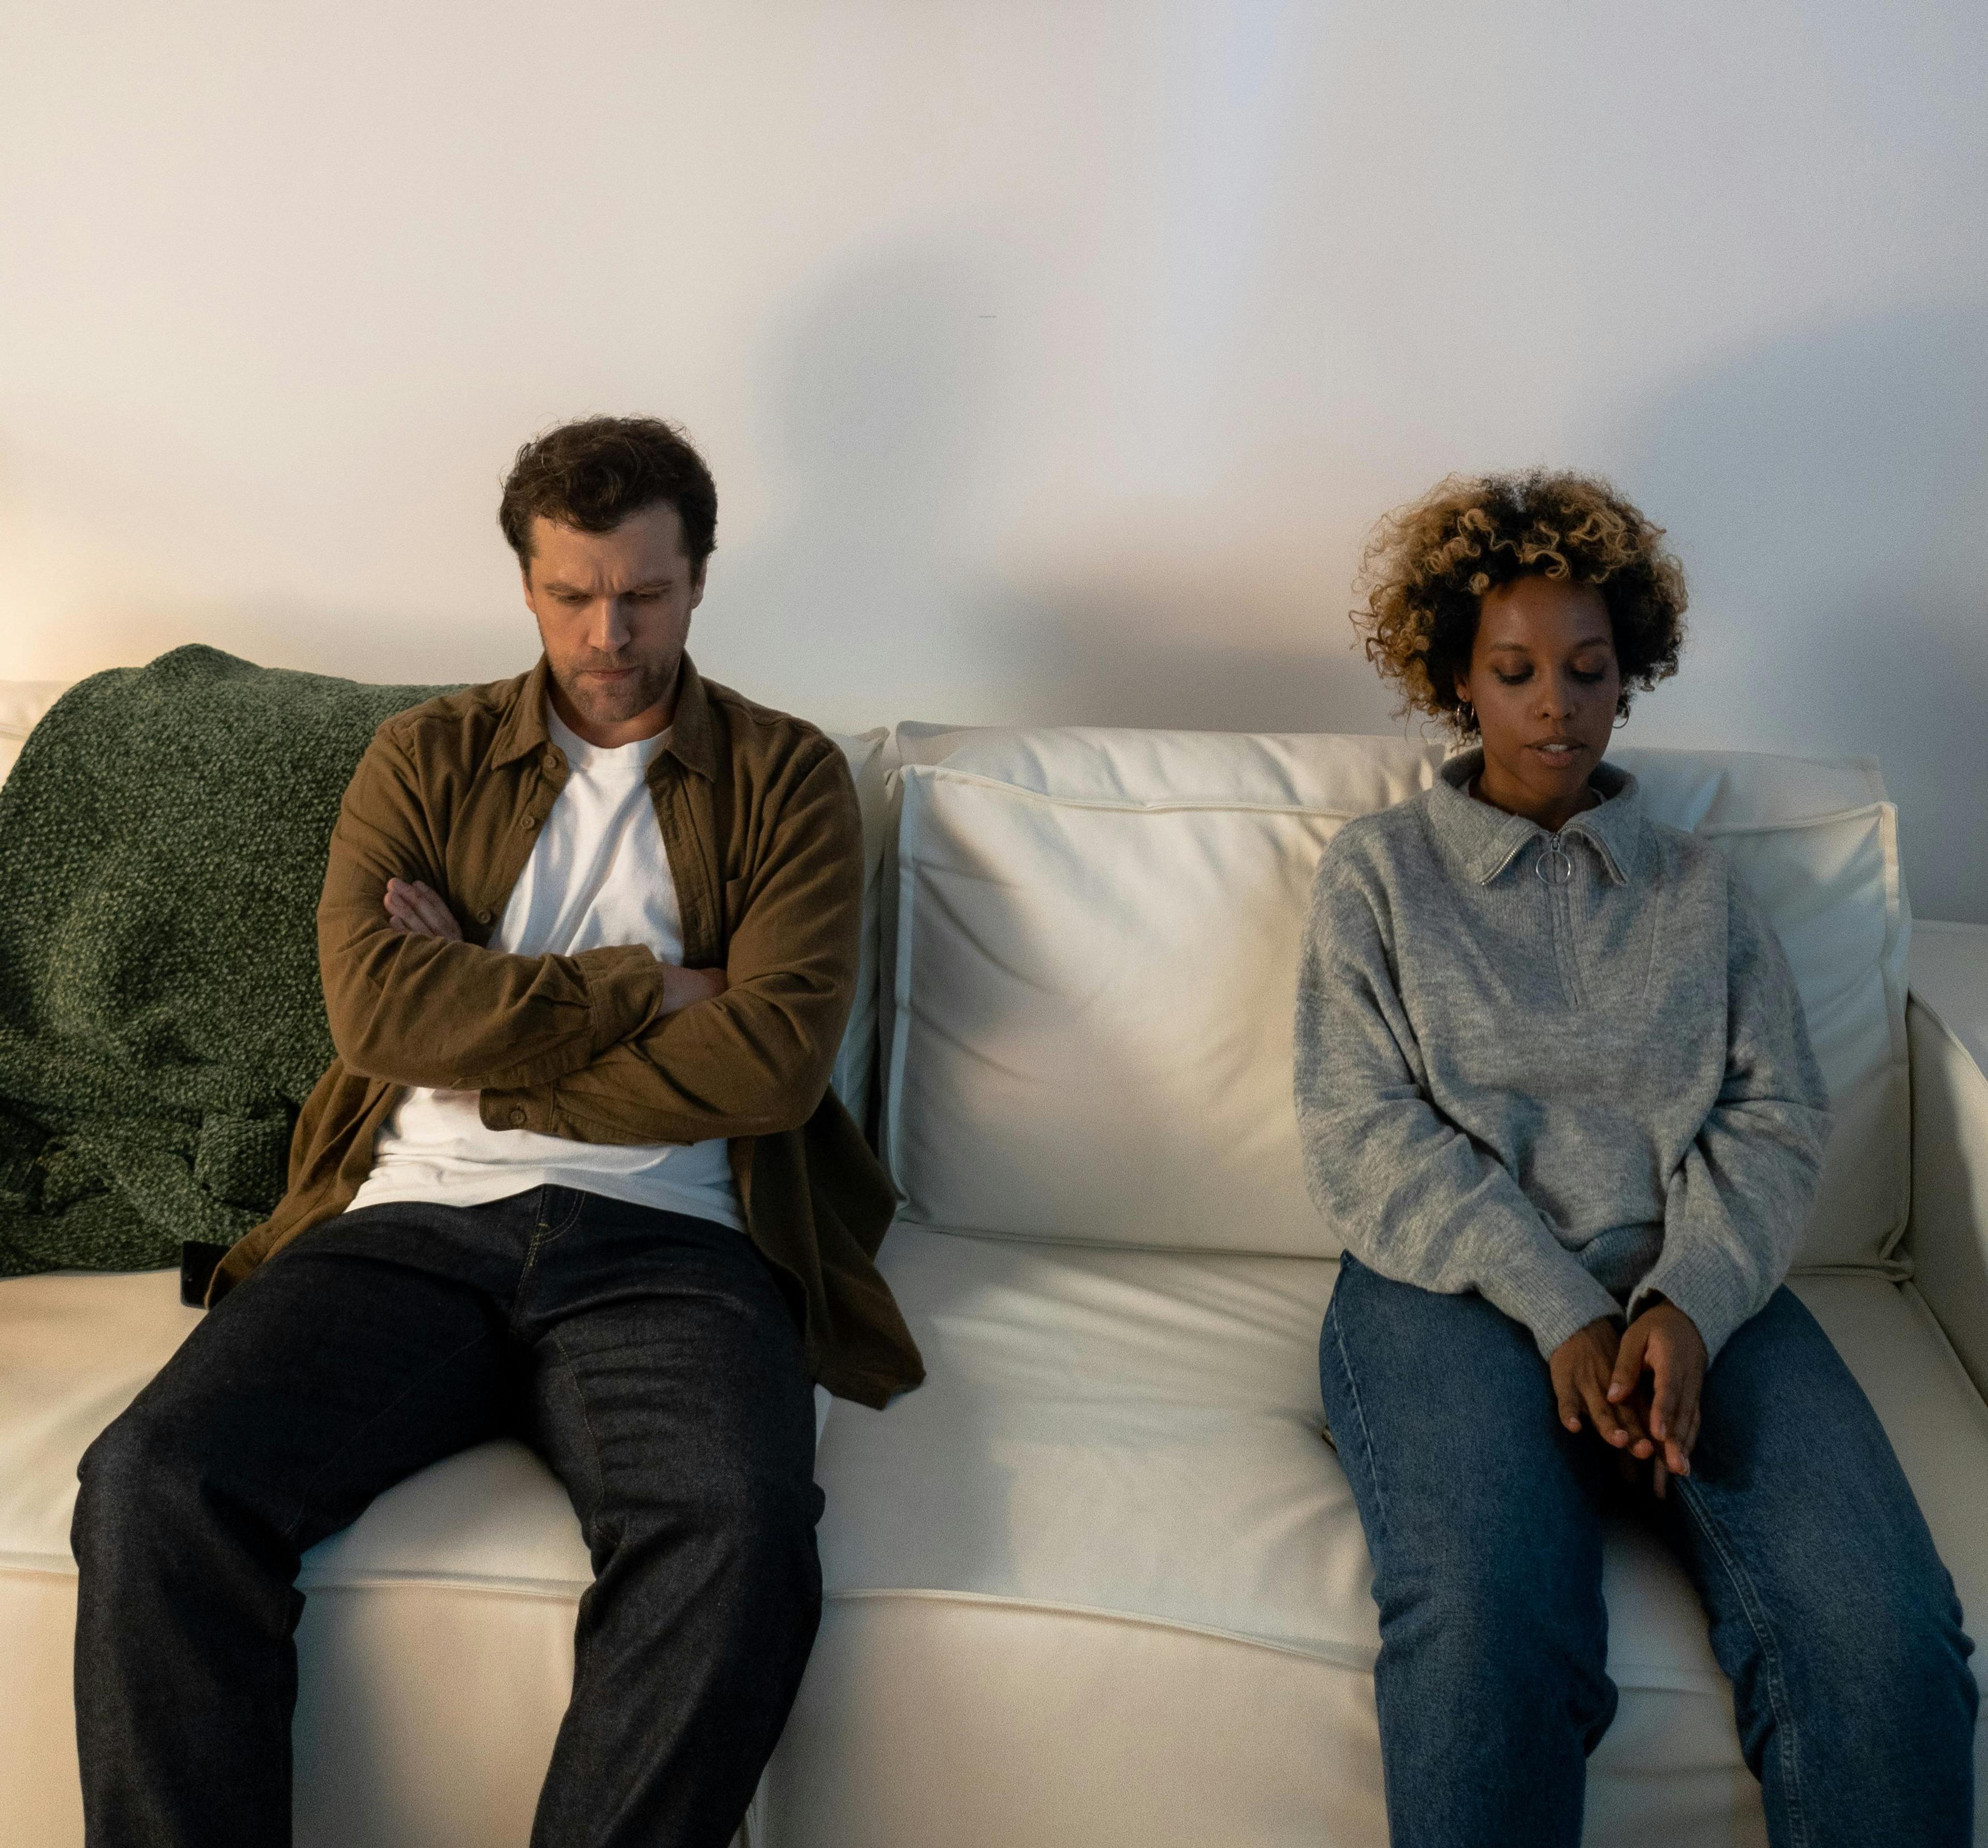 A man and woman sitting on a white couch and considering if there is a chance to get back together.